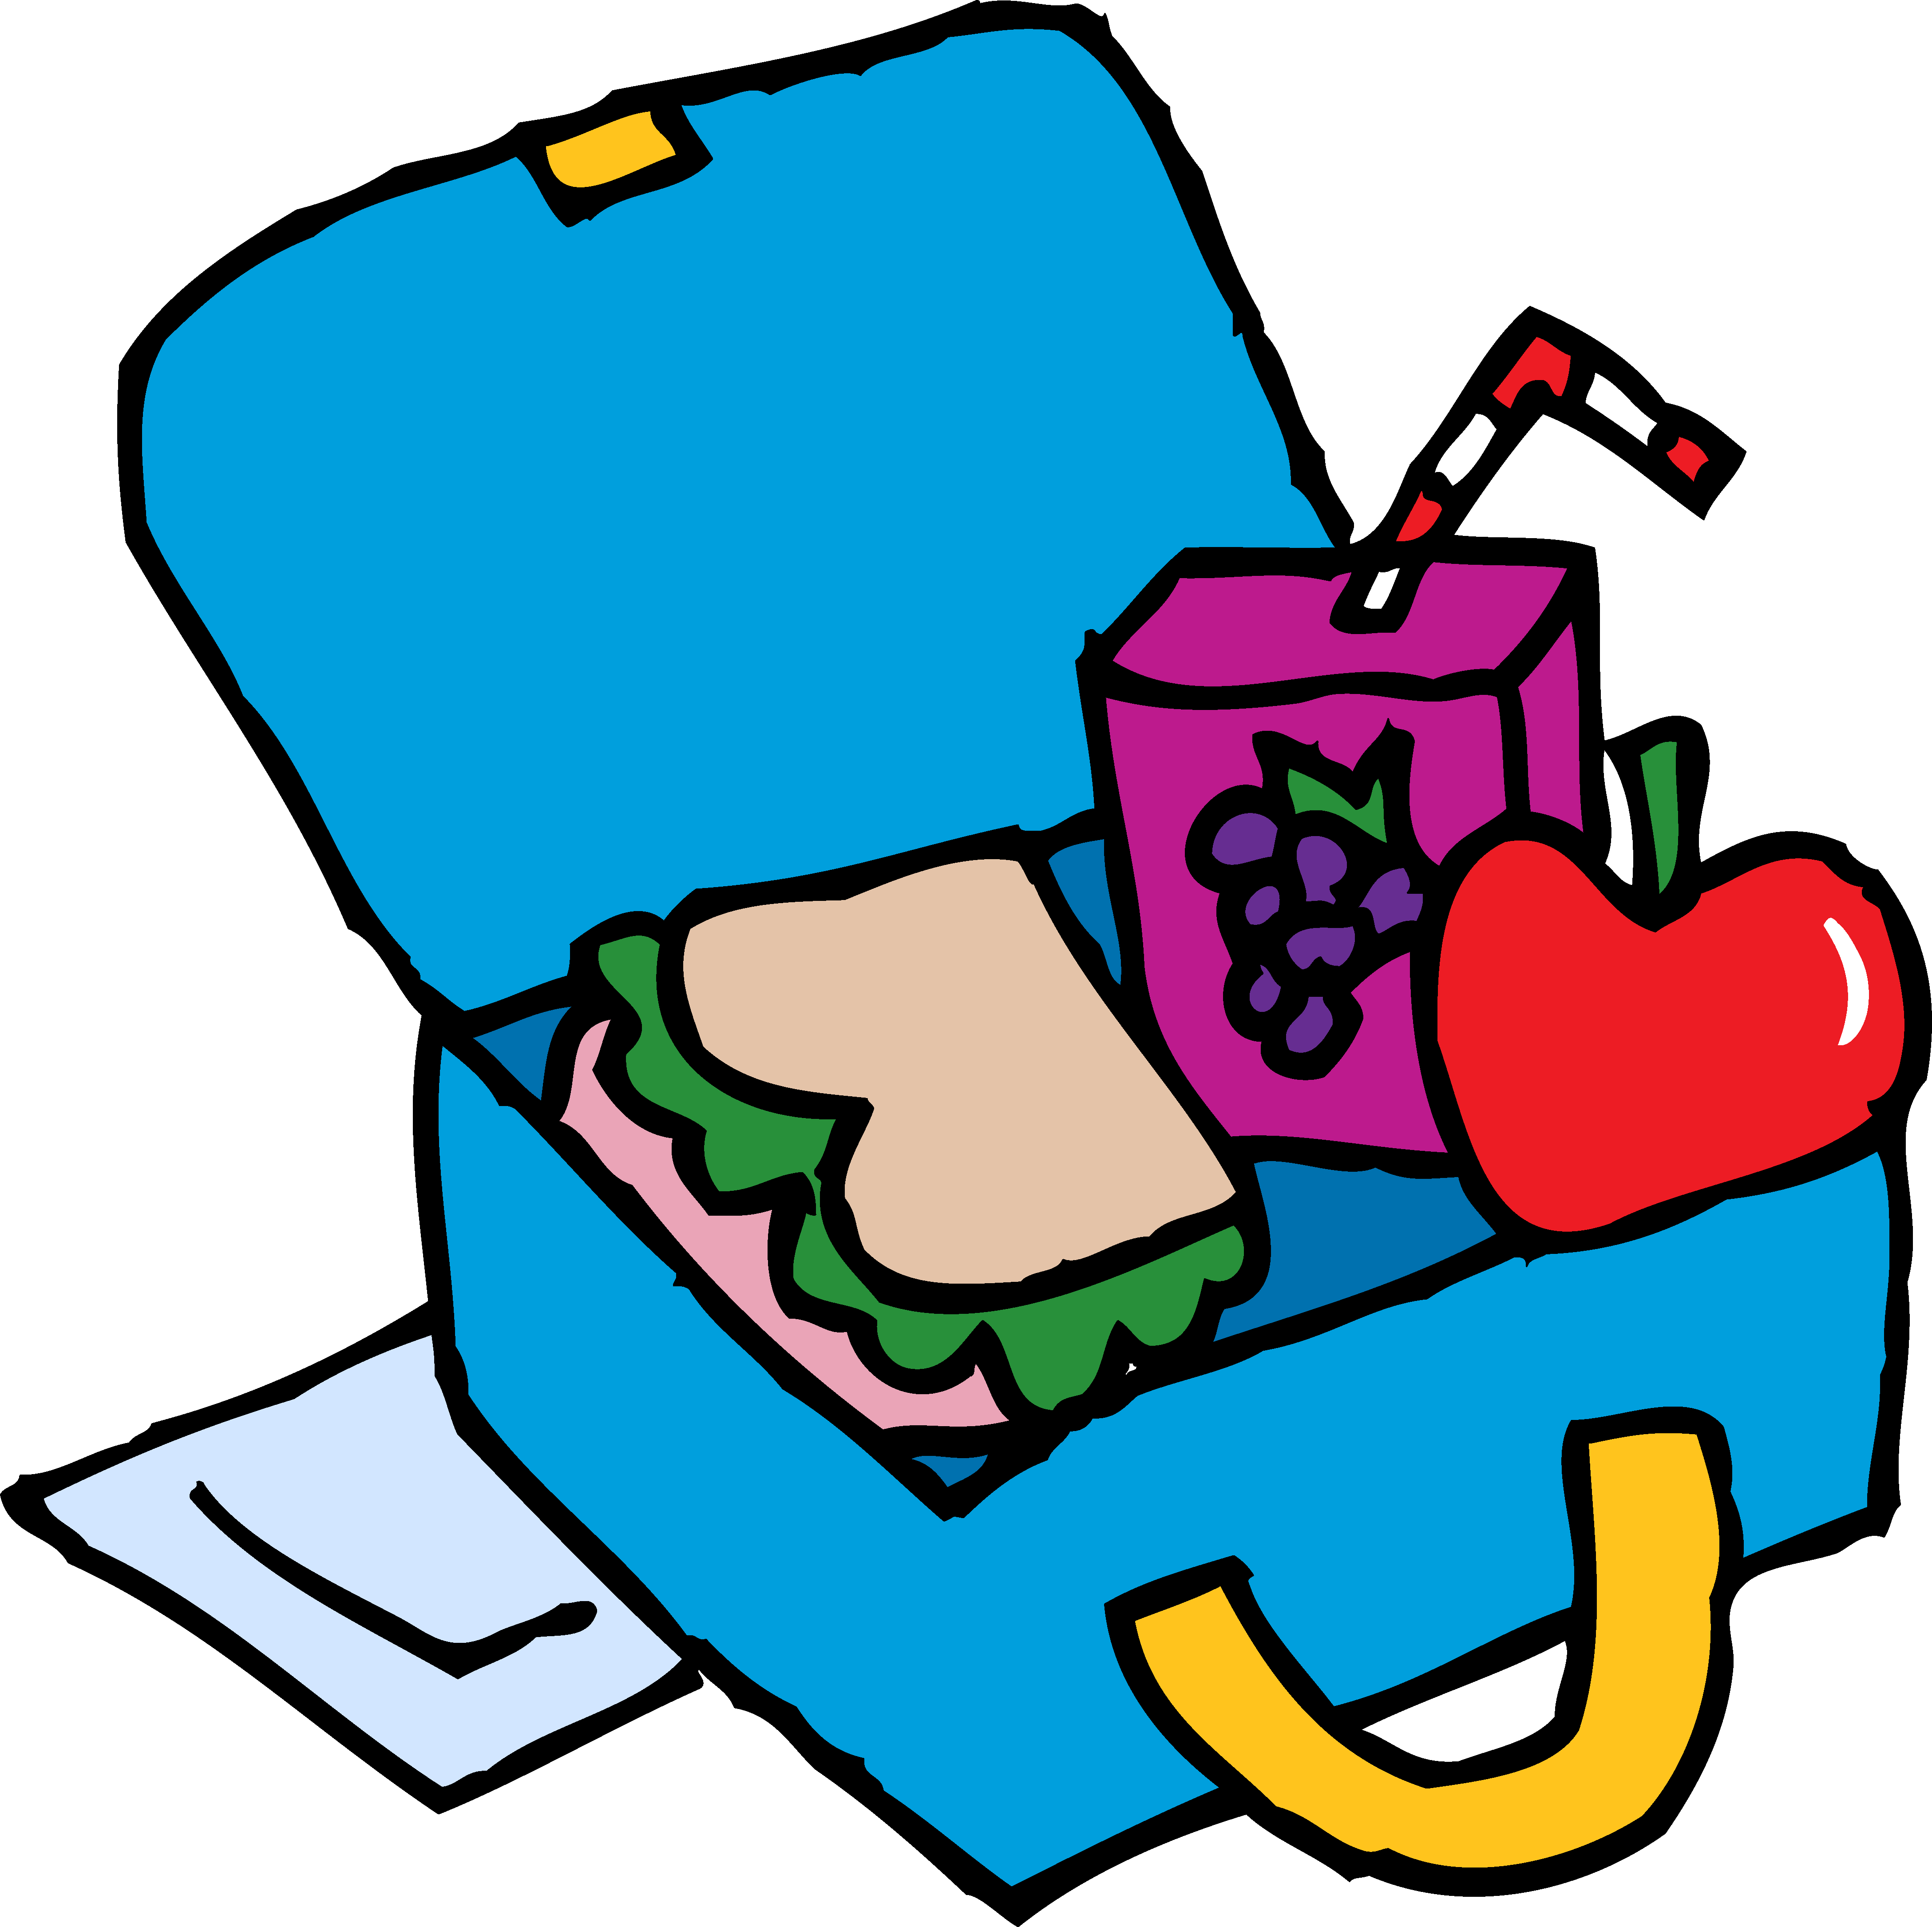 School Lunch Box Clip Art | Clipart library - Free Clipart Images